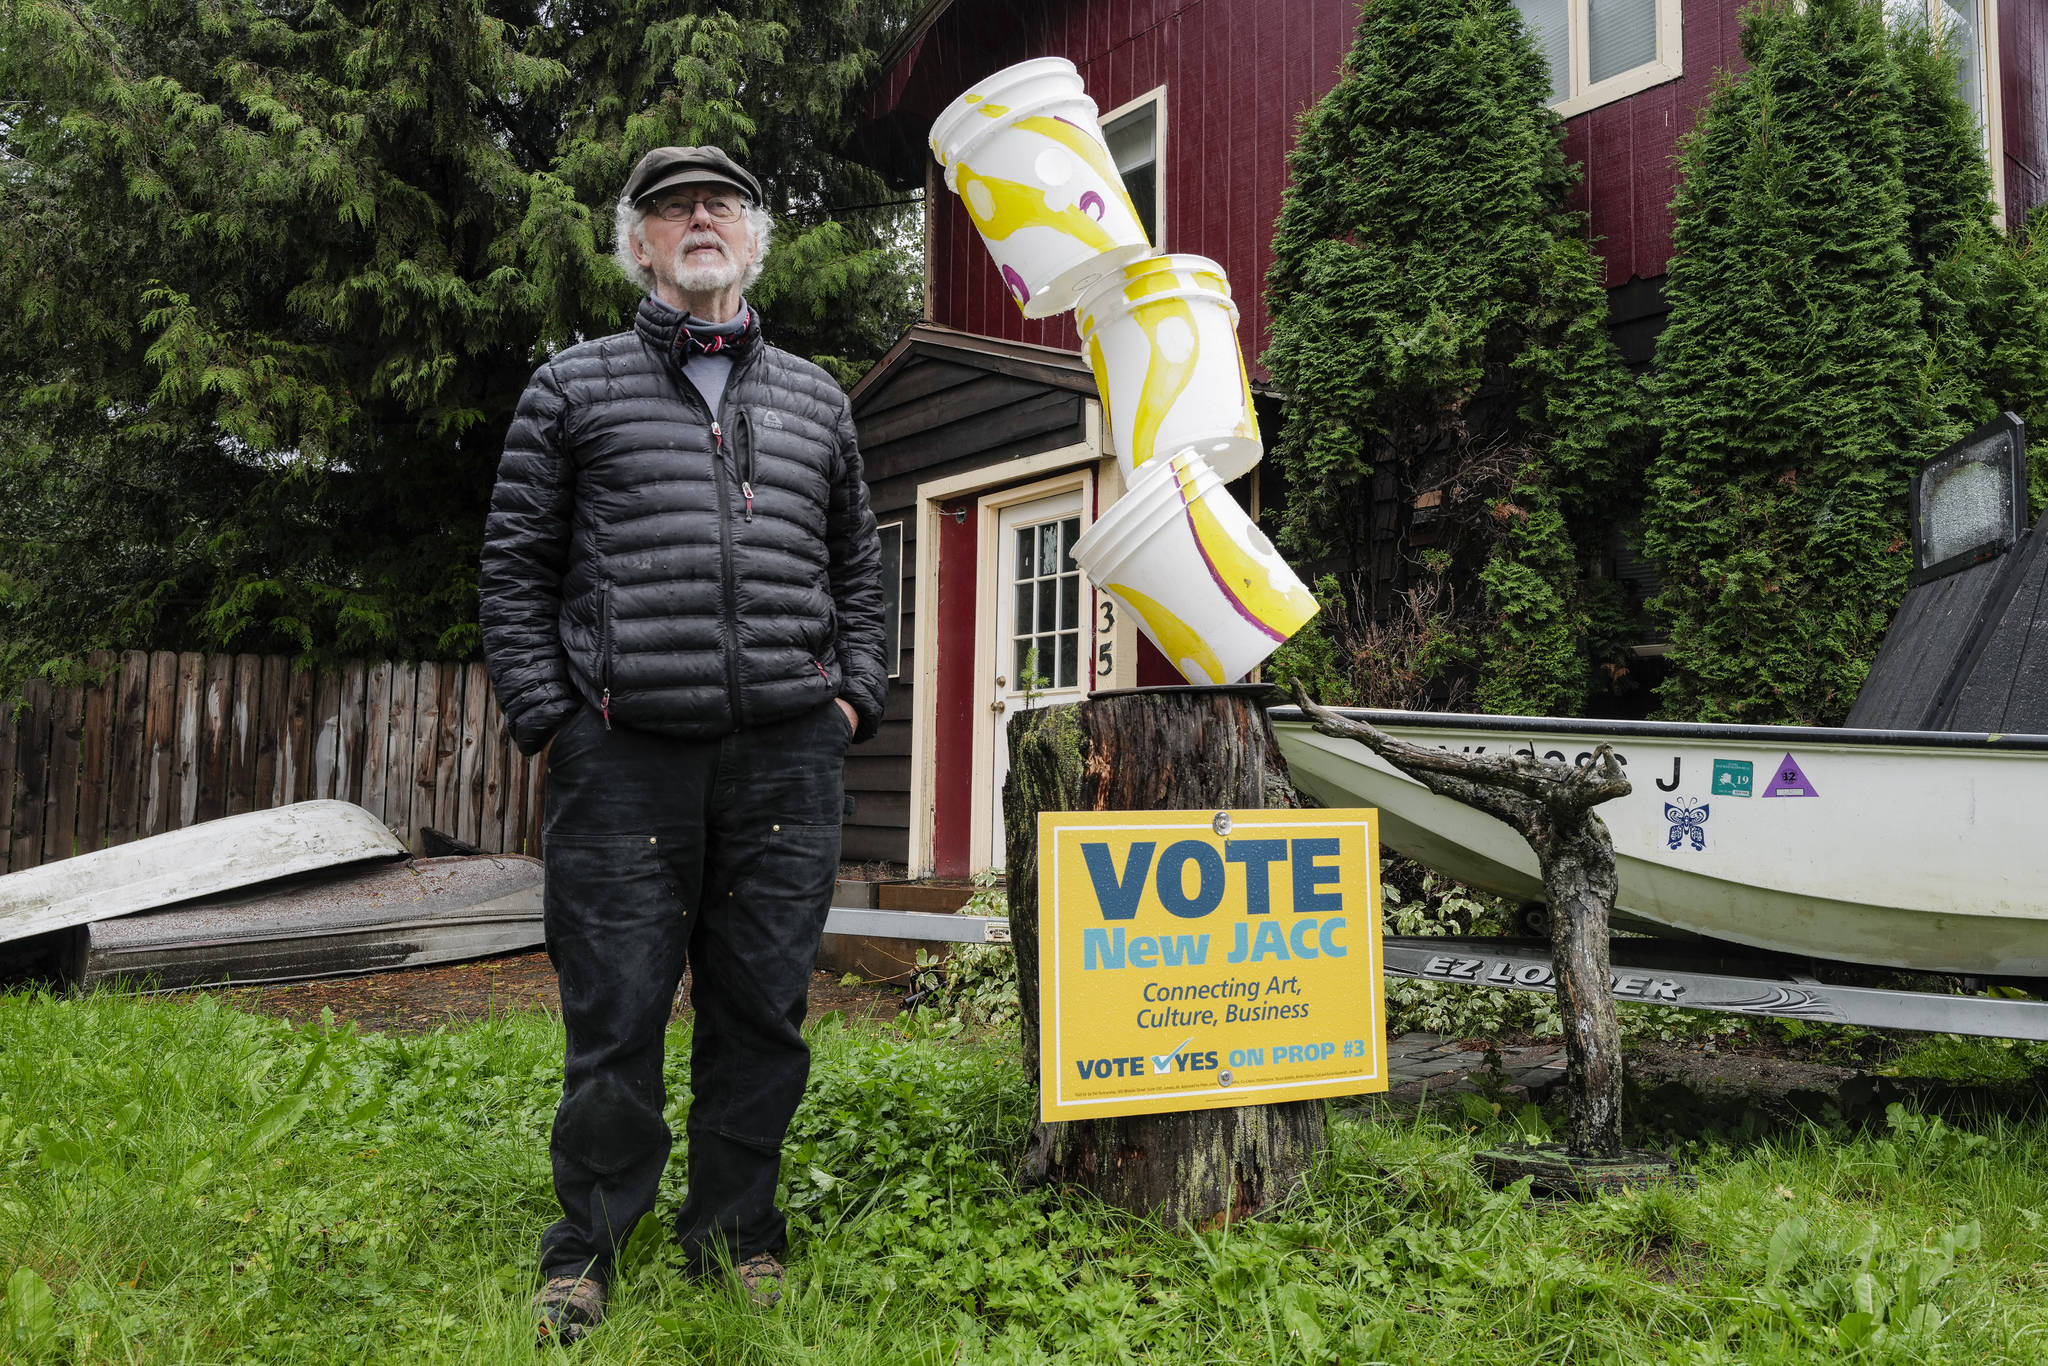 Juneau artist Arnie Weimer stands next to his bucket sculpture and a pro-JACC sign in front of his 12th Street home on Friday, Sept. 20, 2019. (Michael Penn | Juneau Empire)